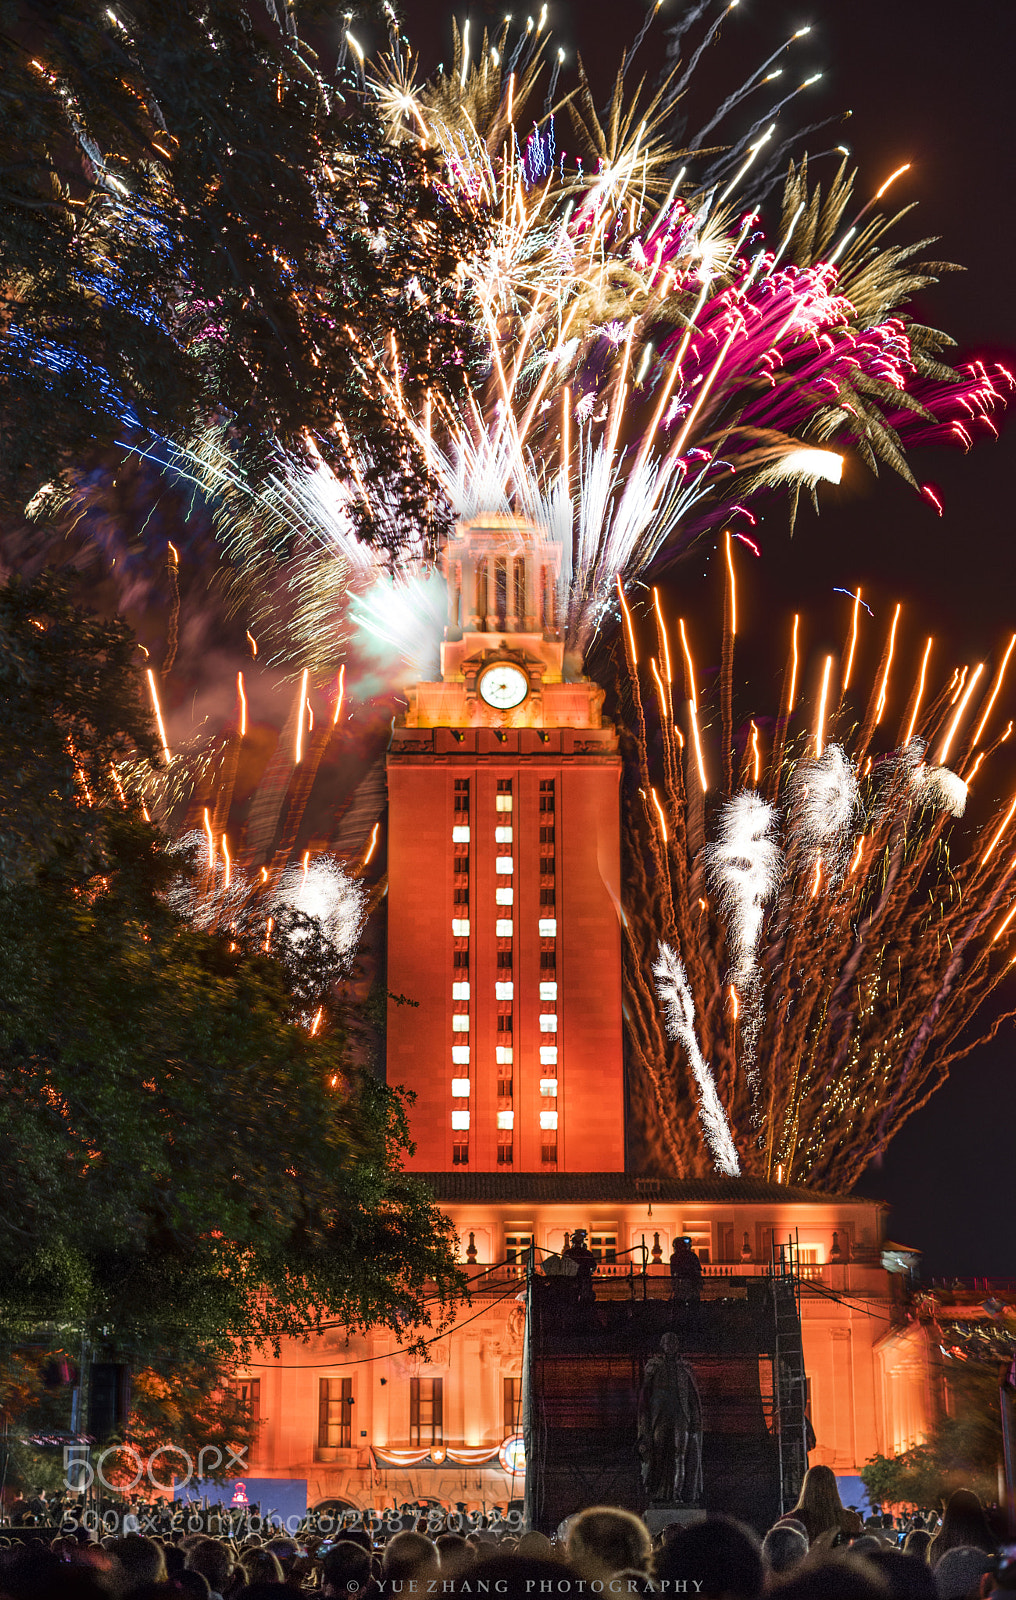 Sony a7 II sample photo. Ut tower fireworks water photography